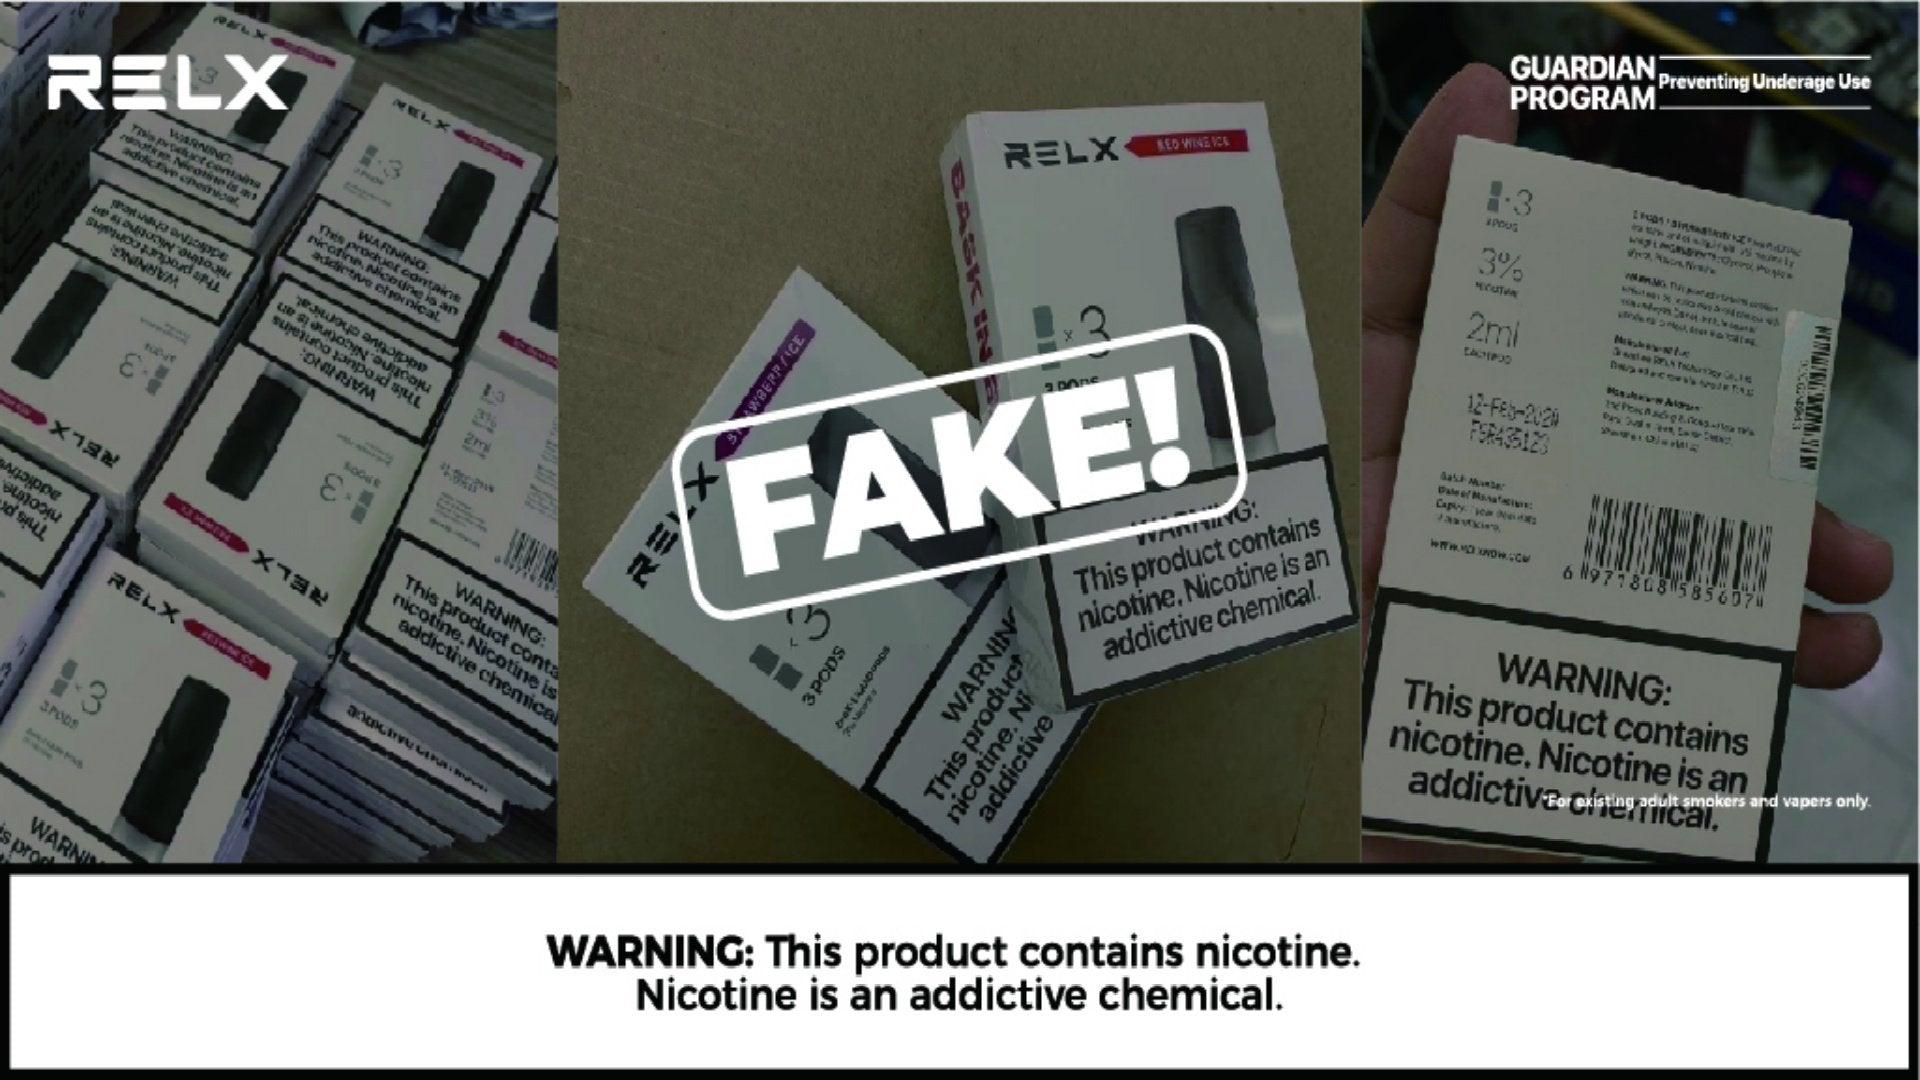 RELX Warns Consumers to Stay Away From Fake RELXPODS - RELX UK